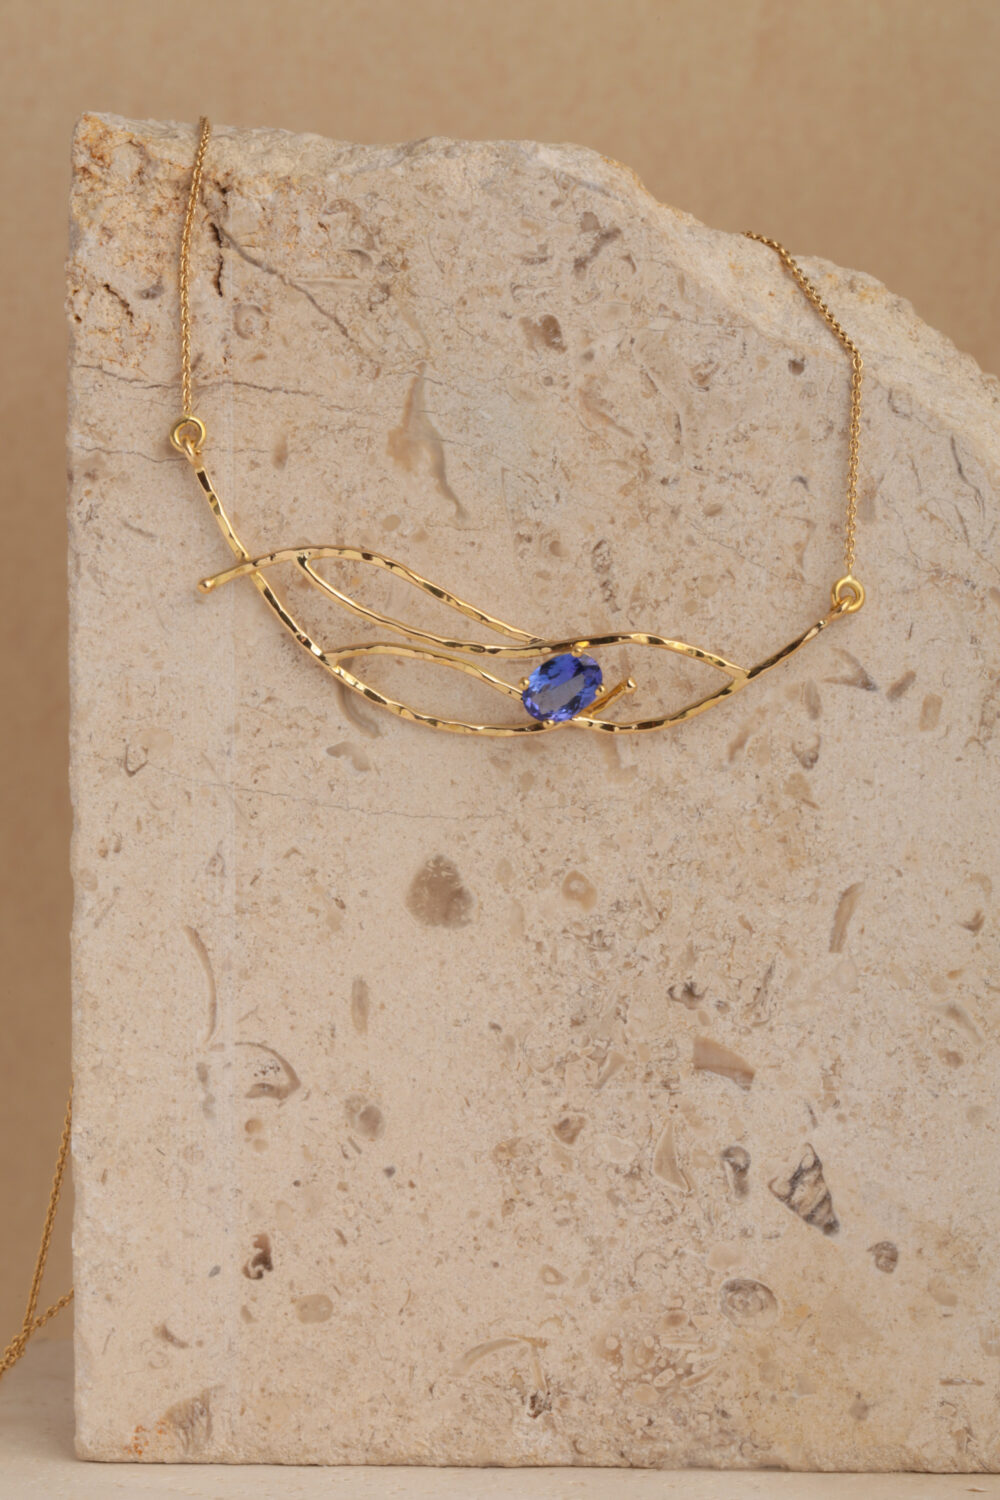 Crafted from 18-karat gold, this necklace is set with an oval-cut tanzanite gemstone.